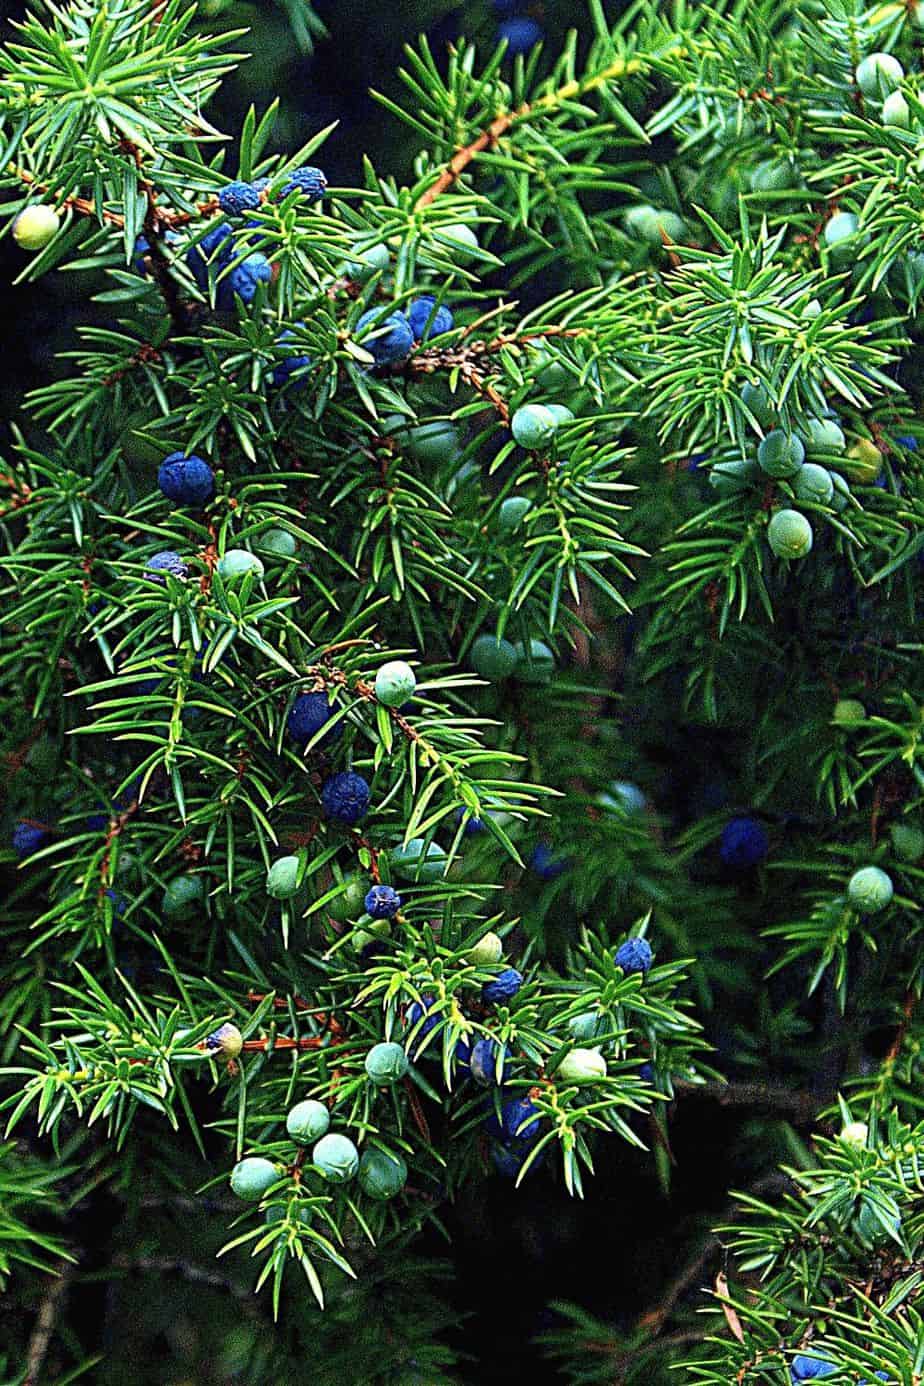 Junipers can grow up to 10 feet tall, hence, are great plants to grow for privacy